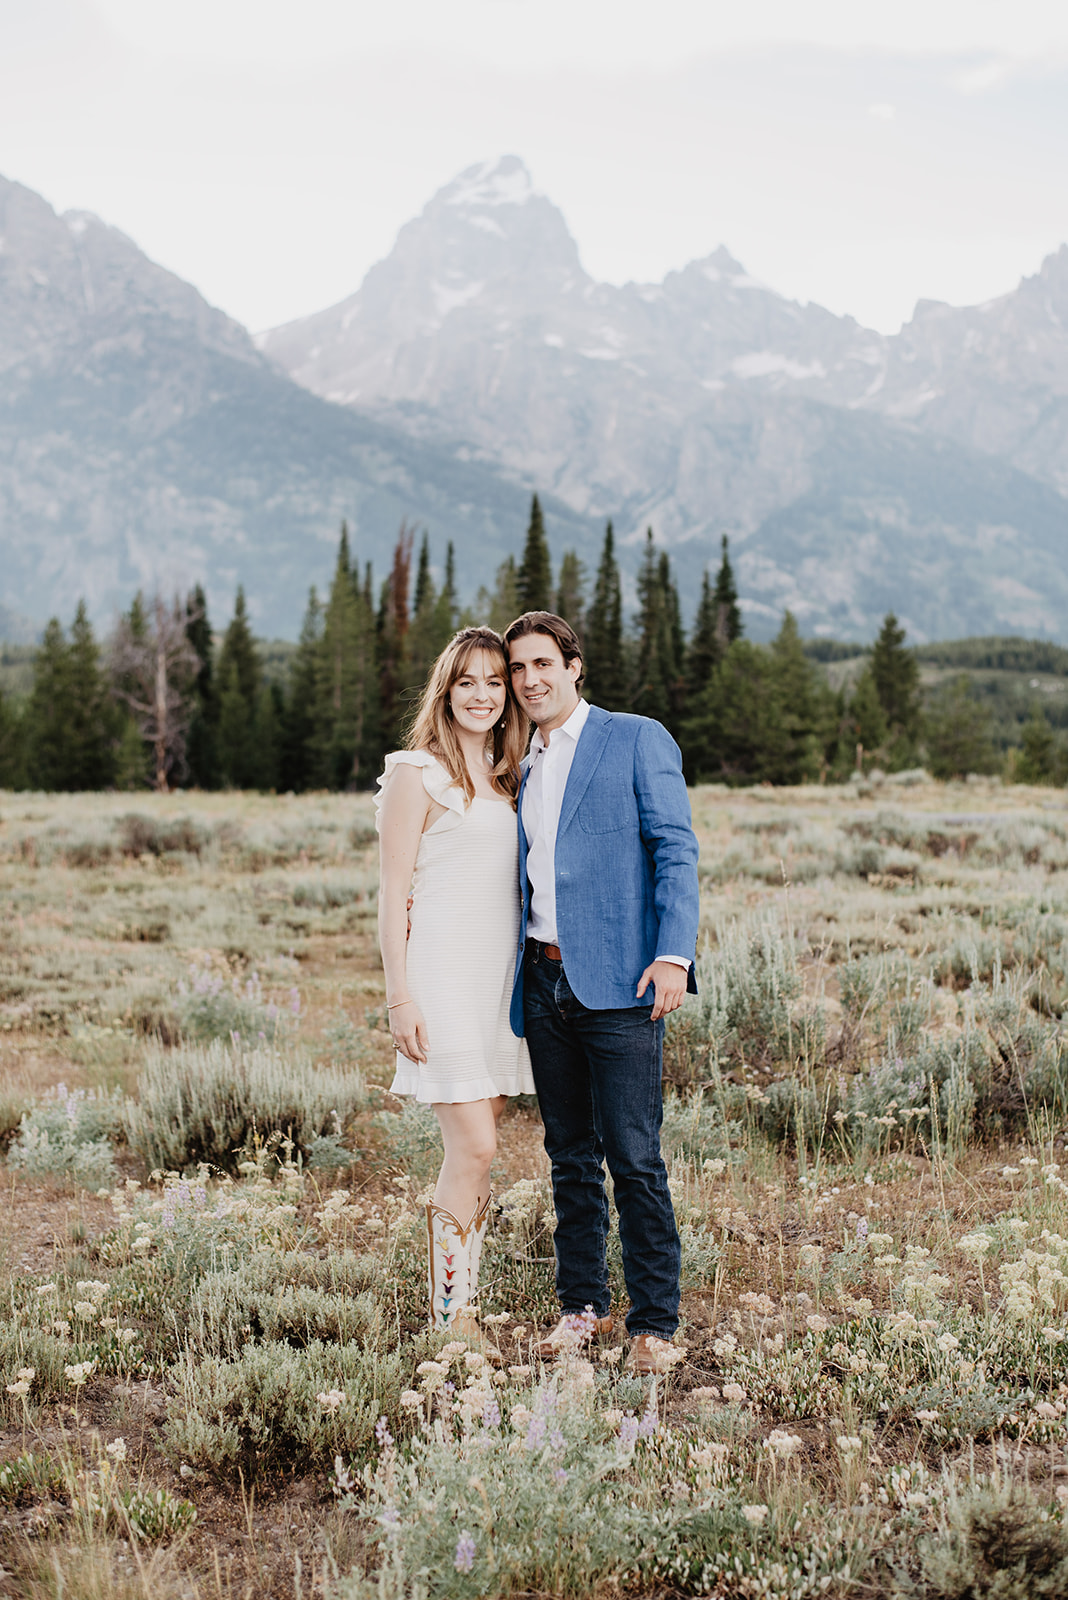 engagement portrait of man in a blue blazer and woman in a white dress standing together in Jackson Hole